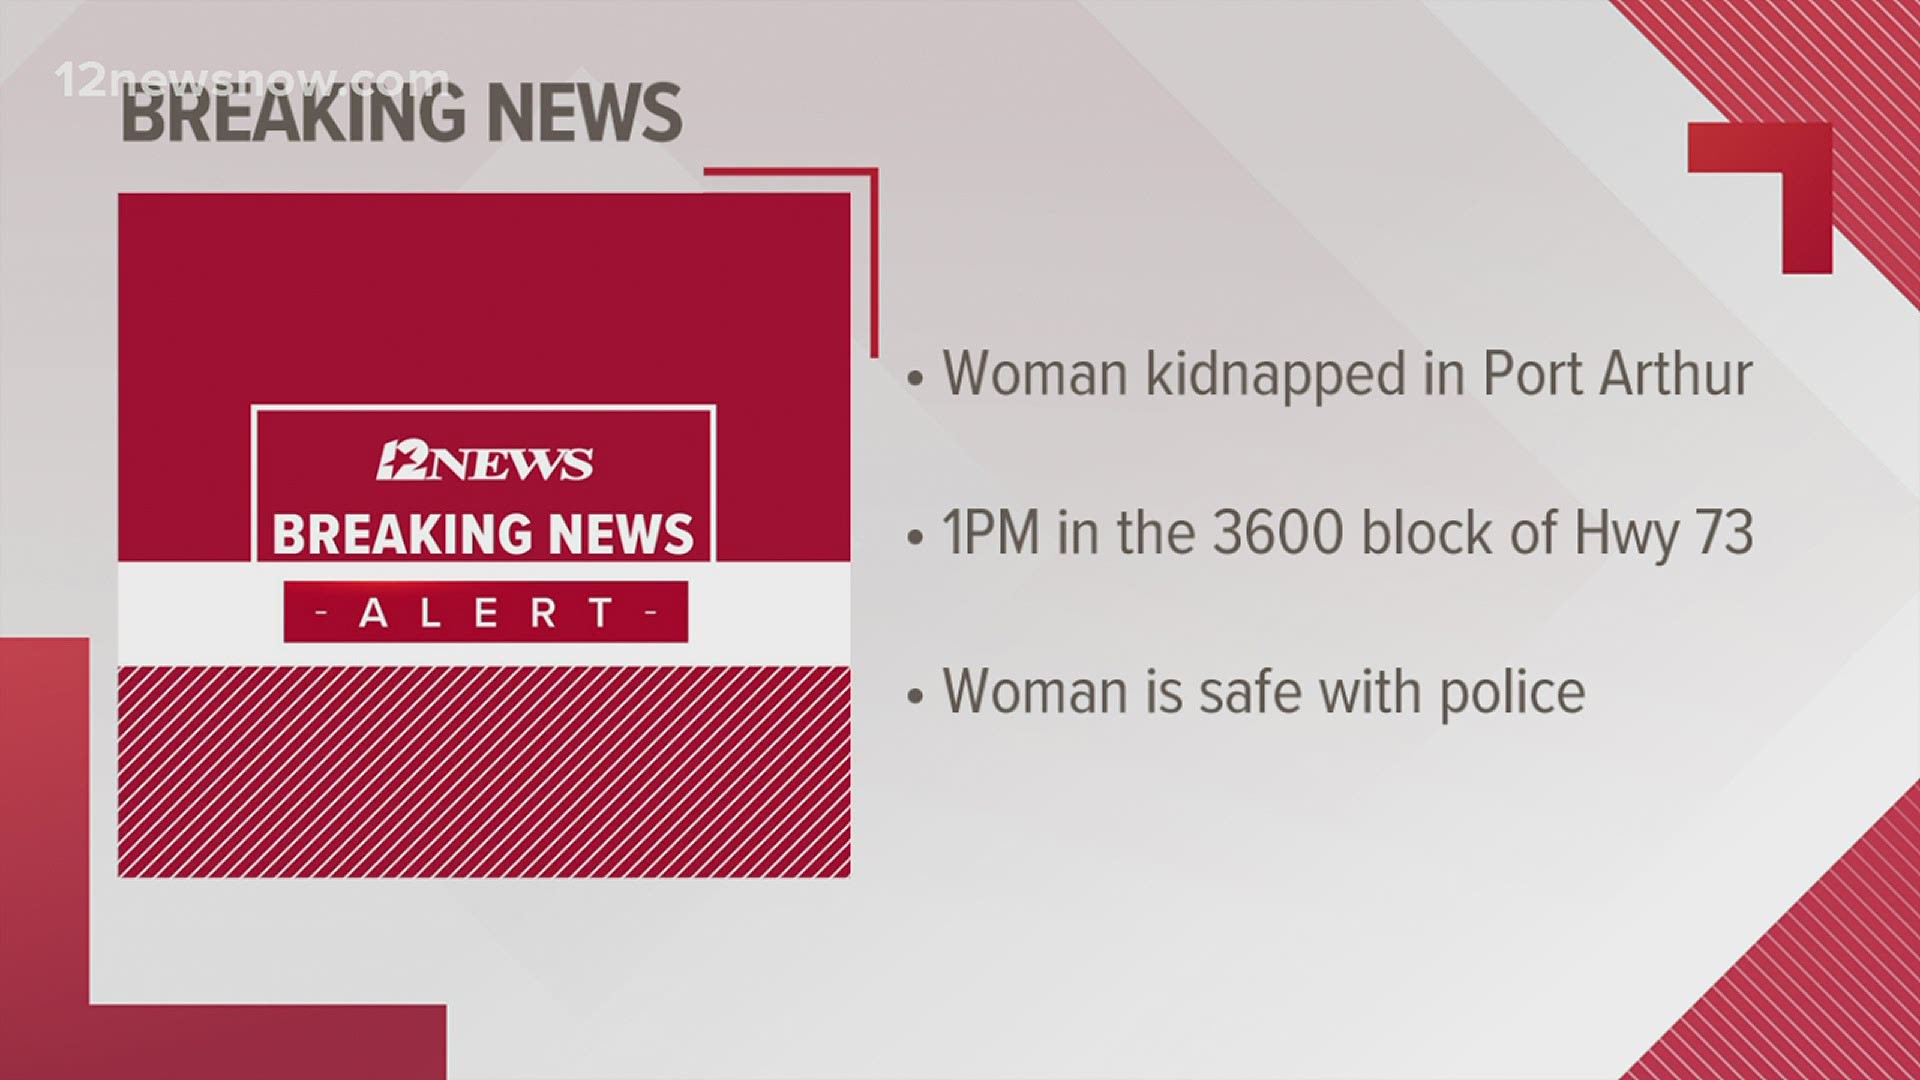 The woman was found in a wooded area near the 3600 block of Highway 73.